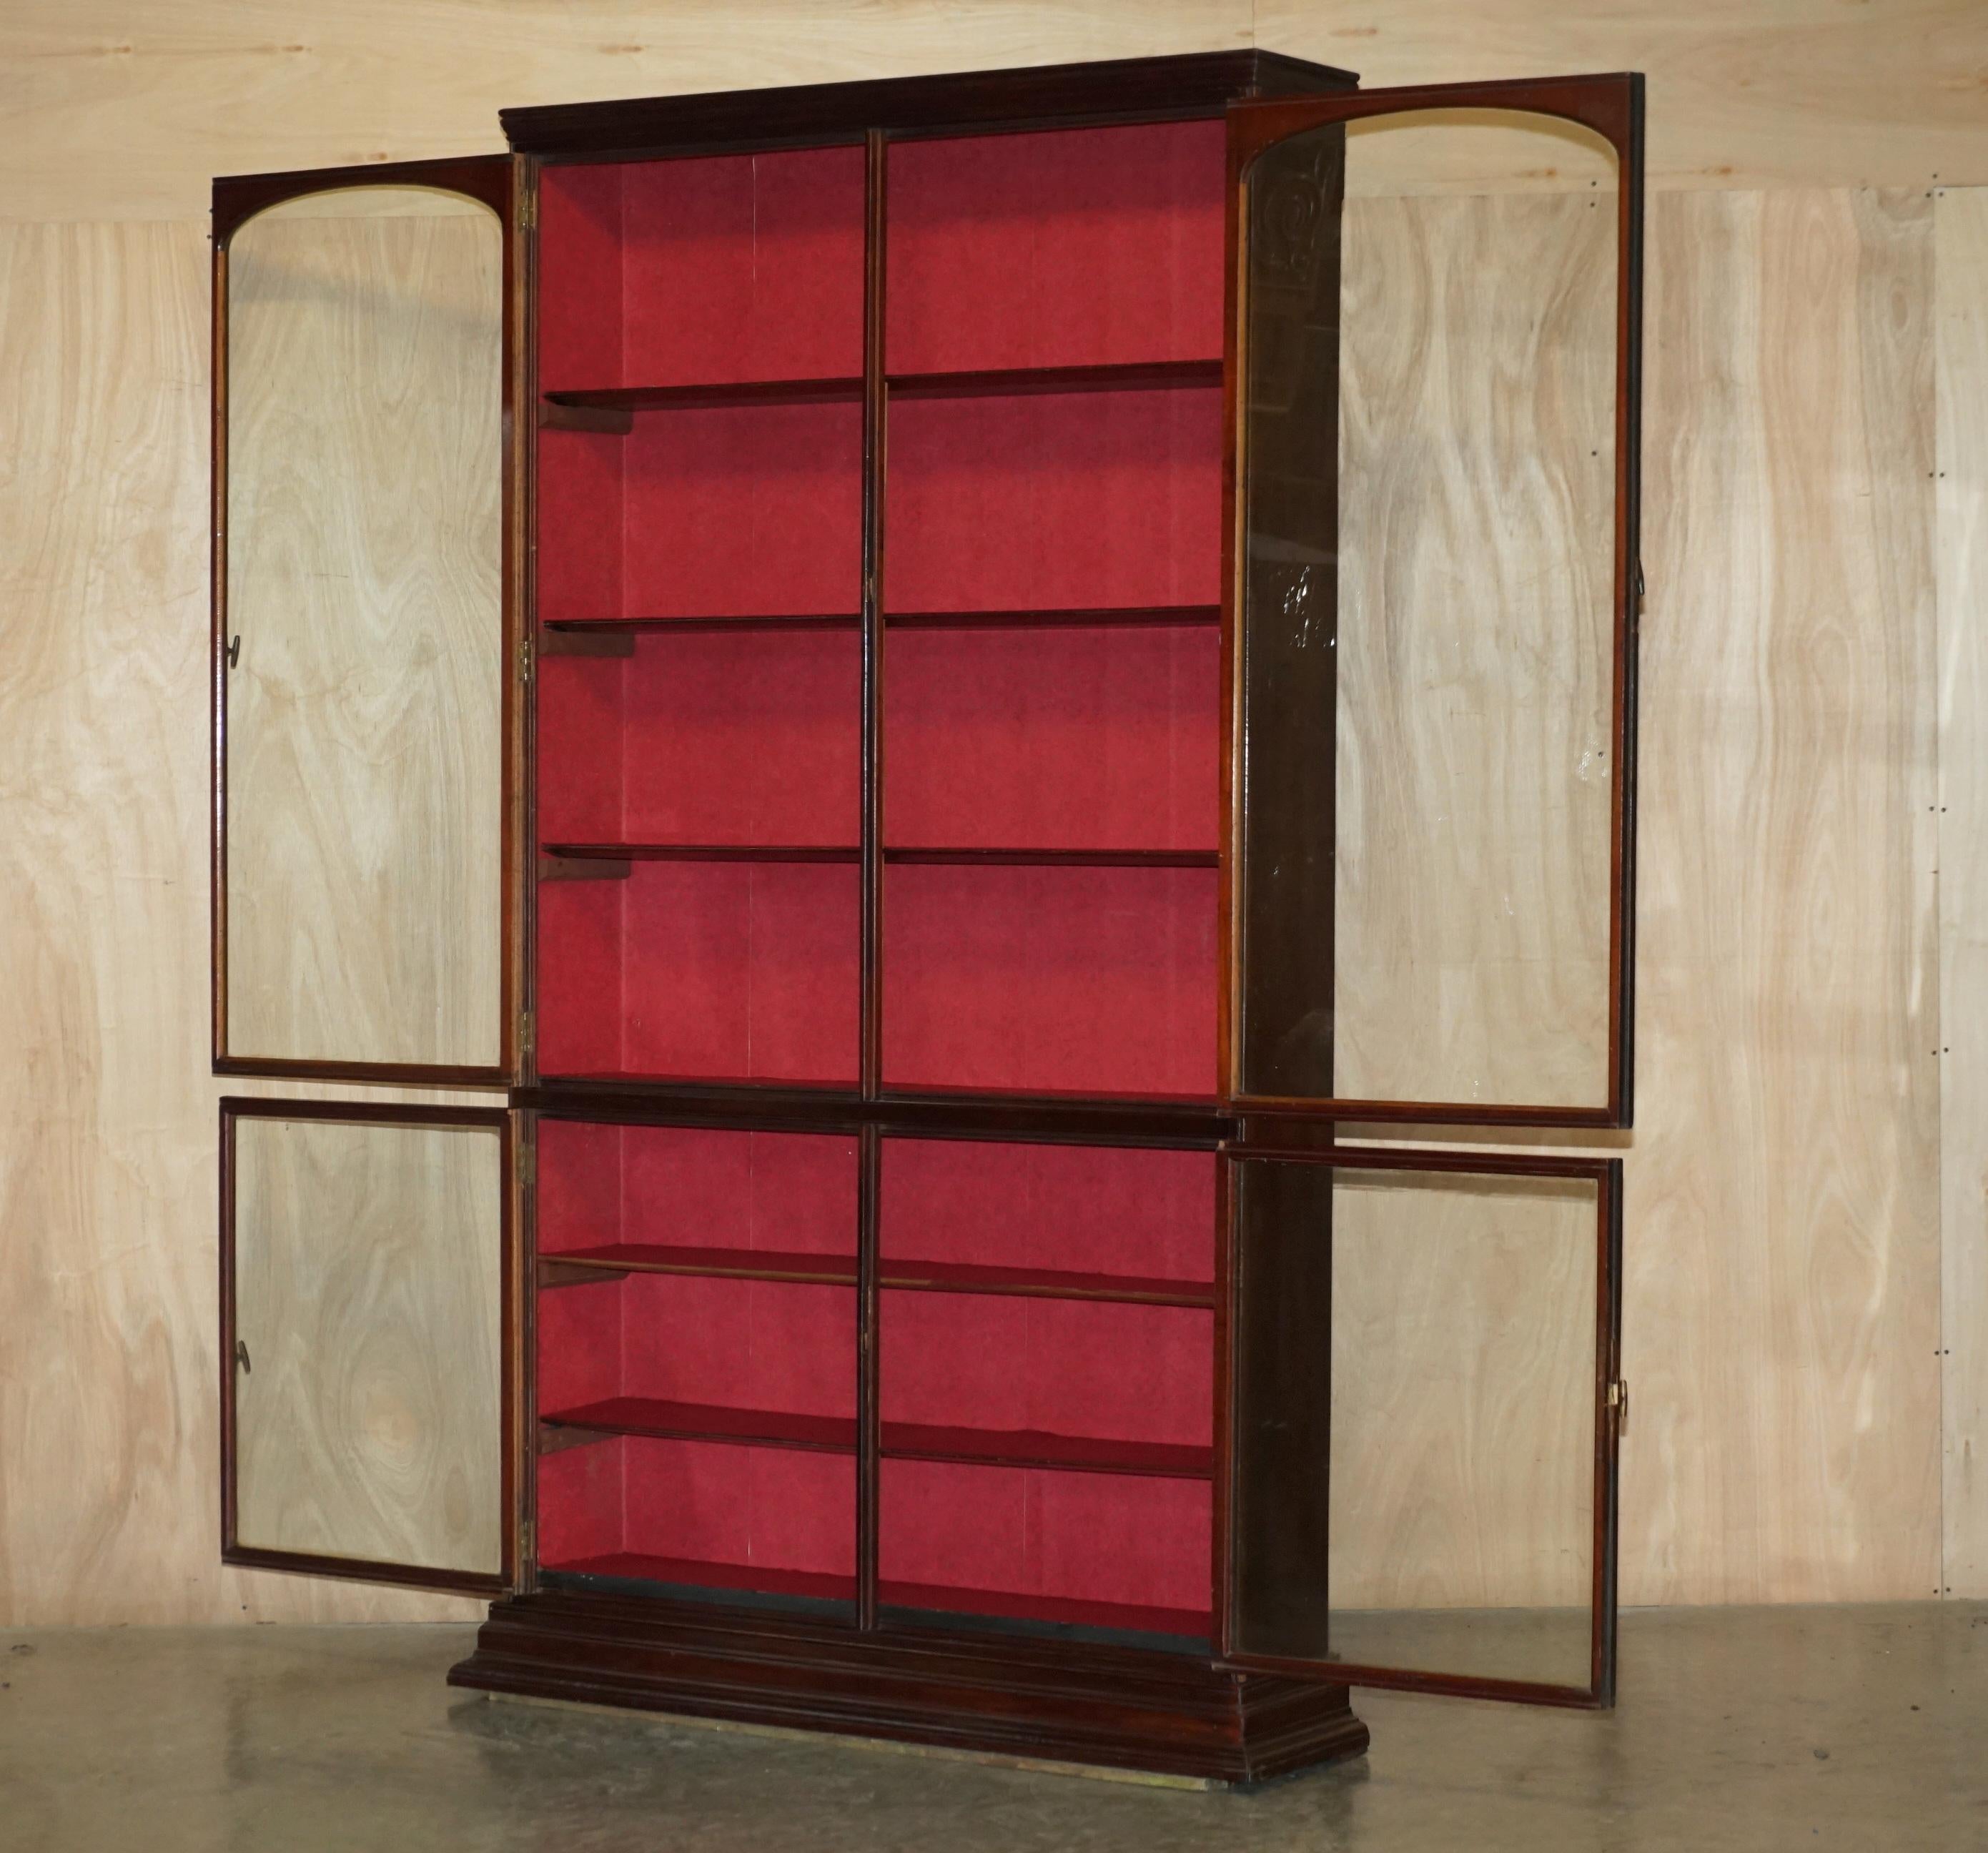 LARGE VICTORIAN HABERDASHERY APOTHECARY SHOPS CABiNET GLAZED DOOR BOOKCASE For Sale 10